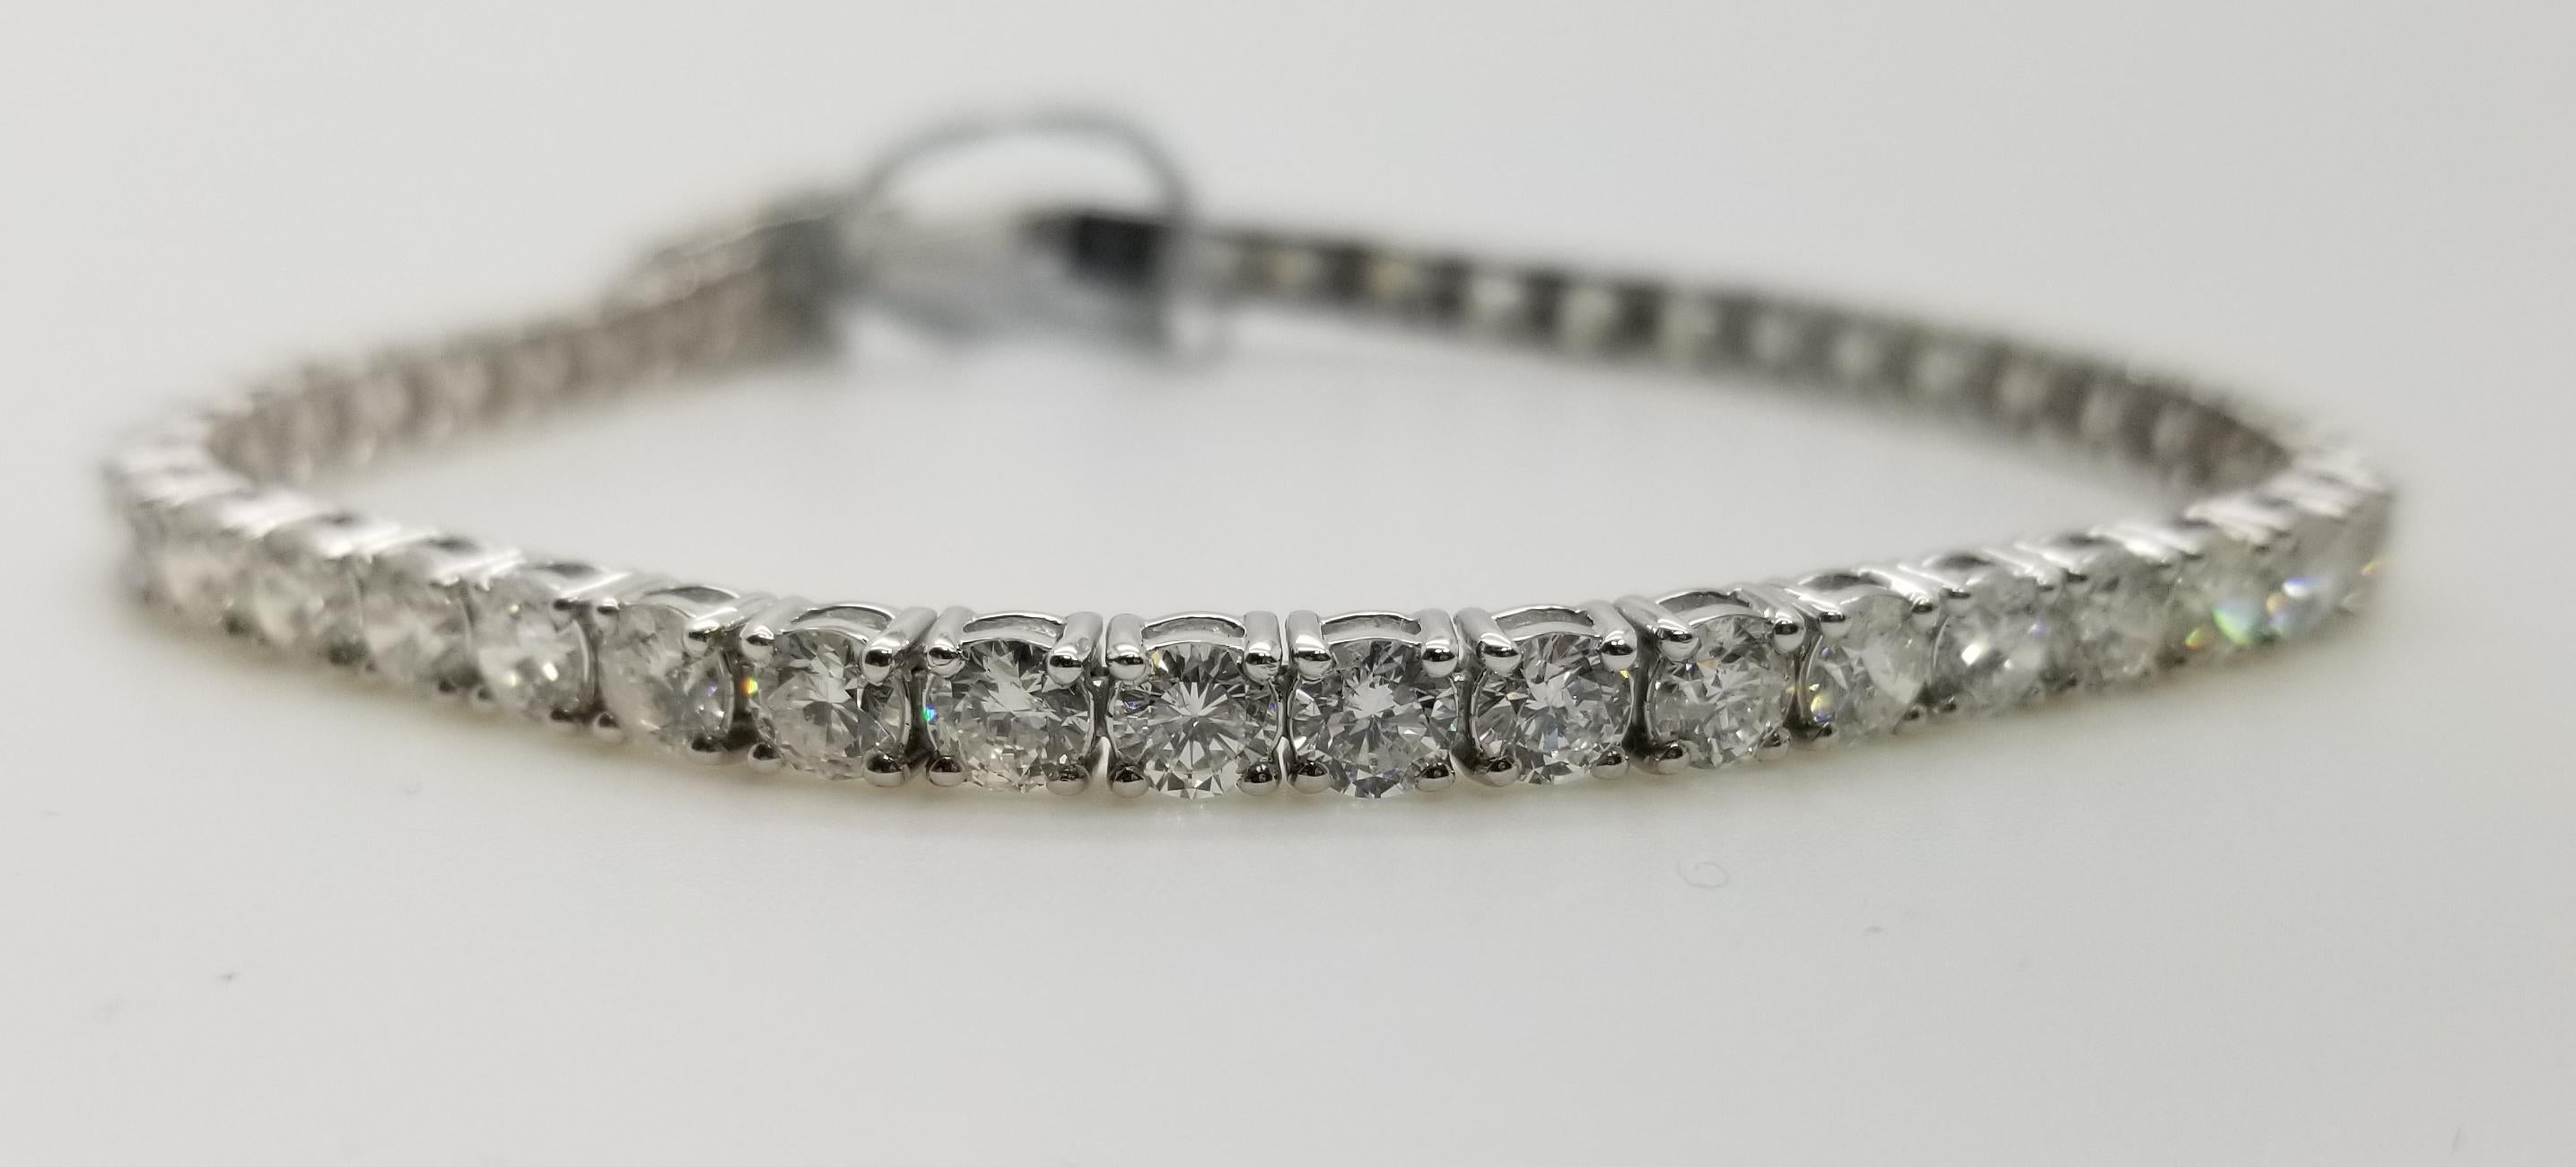 This is very beautiful 14k white gold custom made tennis bracelet with 45 round diamonds color F-G and clarity SI1 weighing 9.01cts. very fine quality diamonds, bracelet measures 7 inches with clasp and safety.
Specifications:
    main stone: ROUND